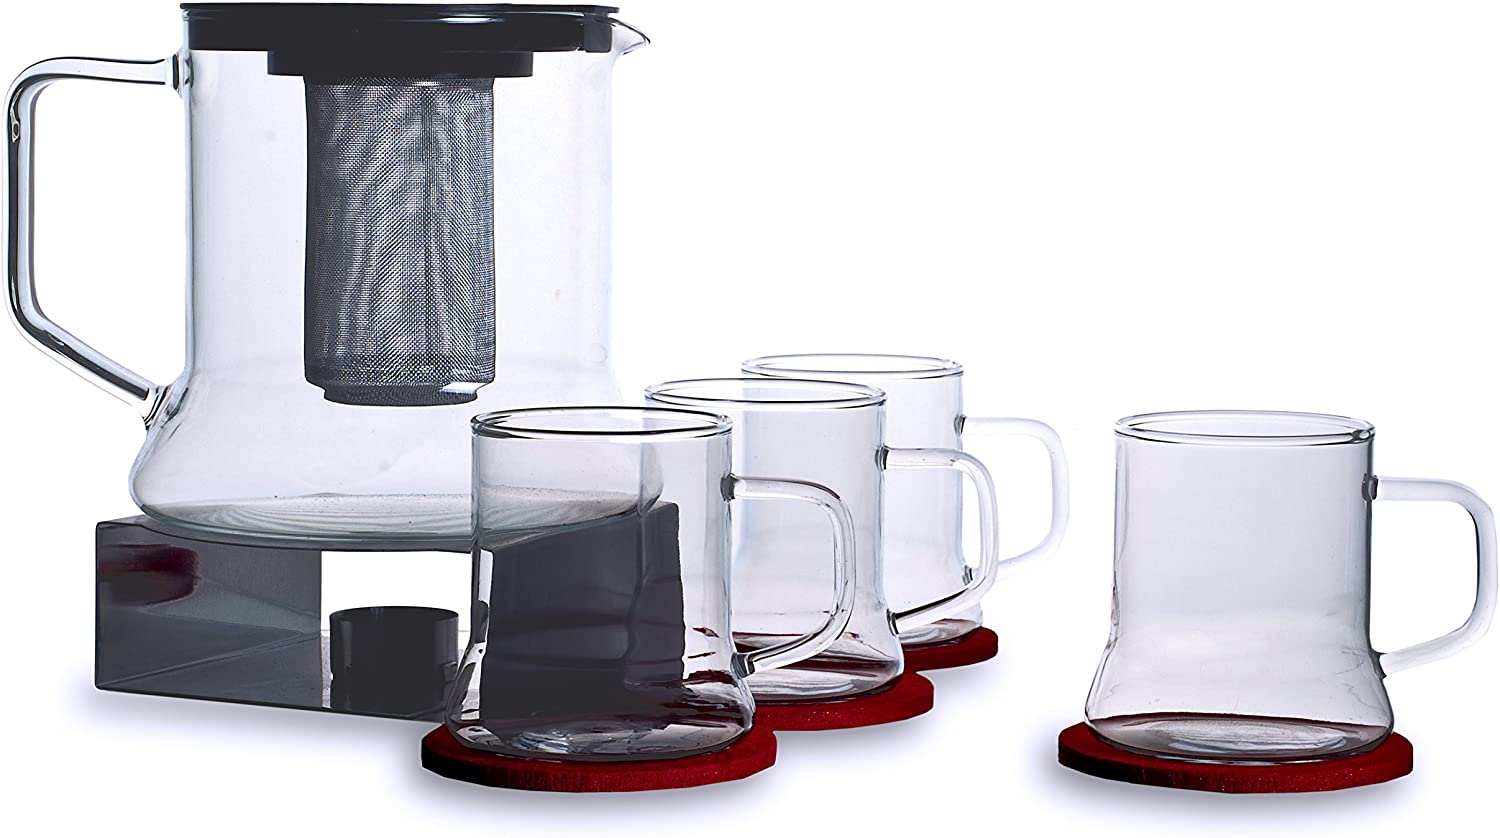 Bohemia Cristal Simax 093 006 127 Punch Set 11 Pieces 1 Pot Approx. 1.8 Litres Made of Heat-Resistant Borosilicate Glass with Plastic Lid and Metal Strainer + 4 Cups Approx. 250 ml Made of Heat-Resistant Borosilicate Glass + 1 Metal Warmer + 4 Felt Coasters